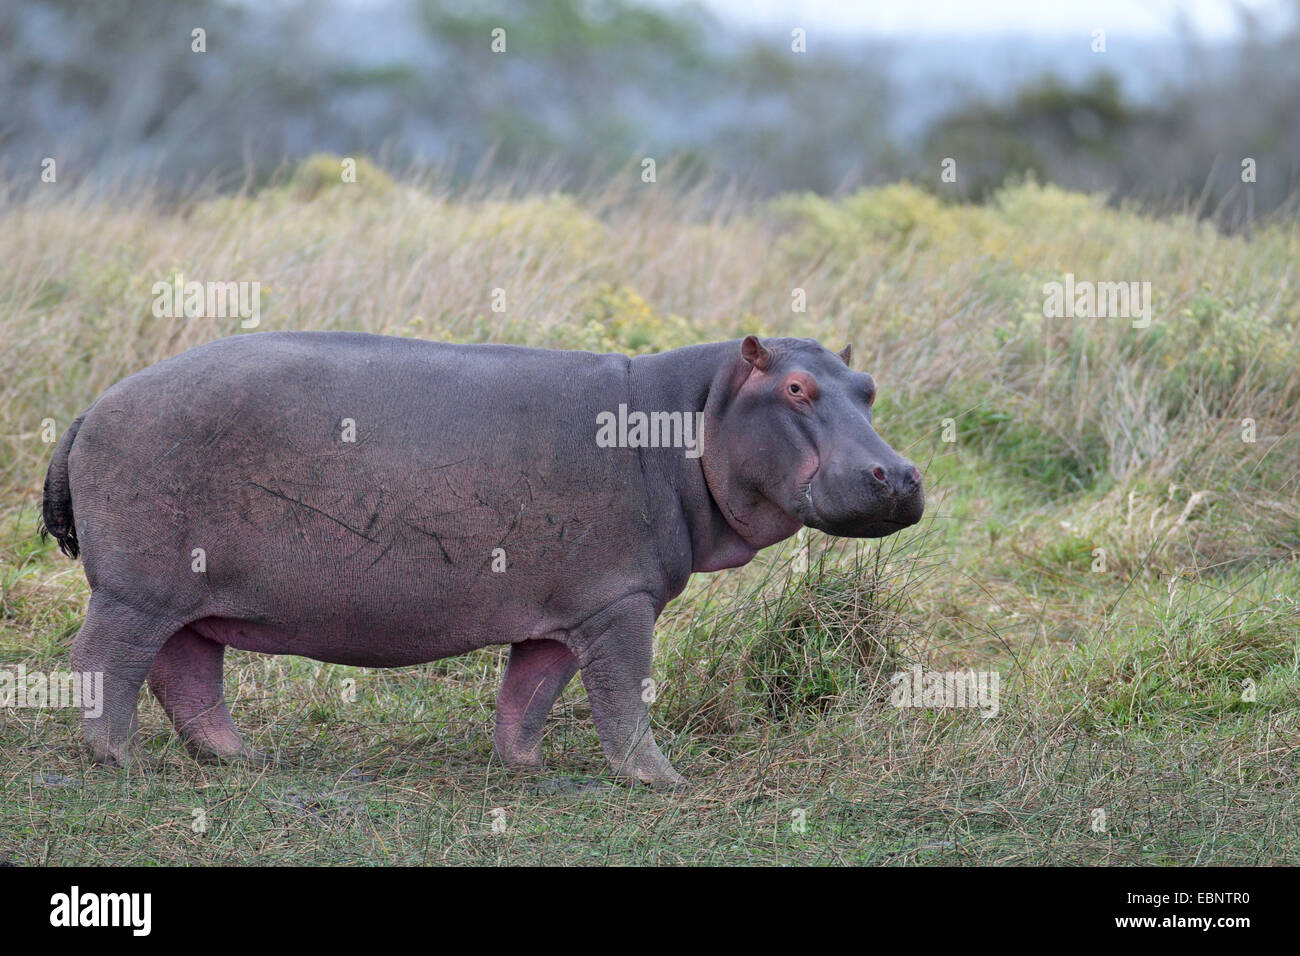 hippopotamus, hippo, Common hippopotamus (Hippopotamus amphibius), standing on grassland at the edge of a lake, South Africa, St. Lucia Wetland Park Stock Photo